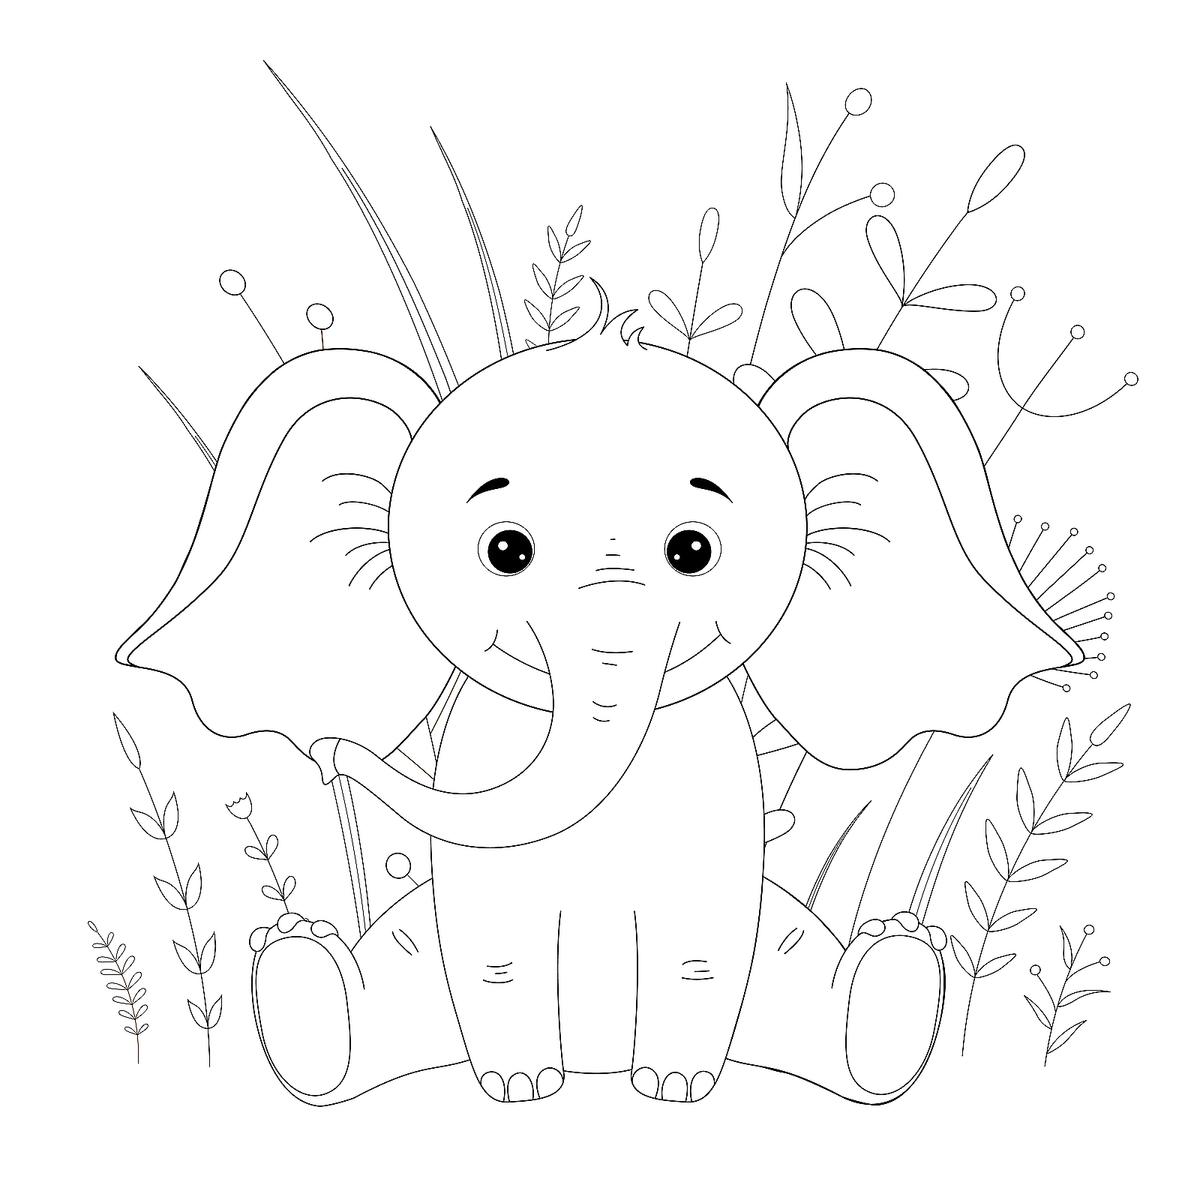 Elephant coloring pages free fun printable elephant coloring pages for kids adults printables mom